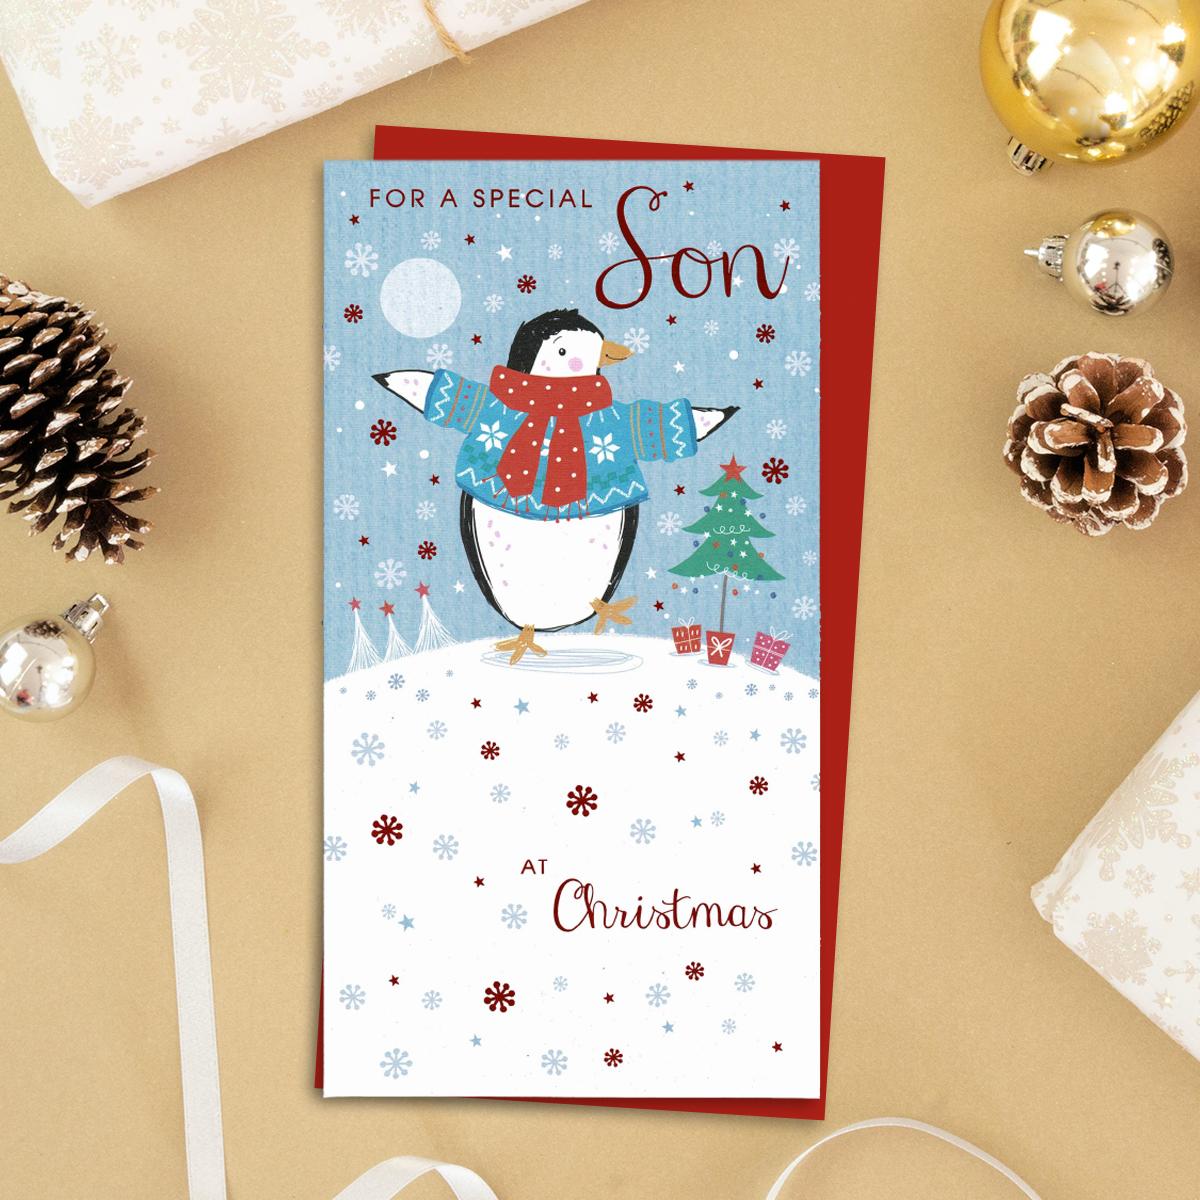 For A Special Son At Christmas Featuring An Ice Skating Penguin! Red Foil Detail And Red Envelope Complete This Design